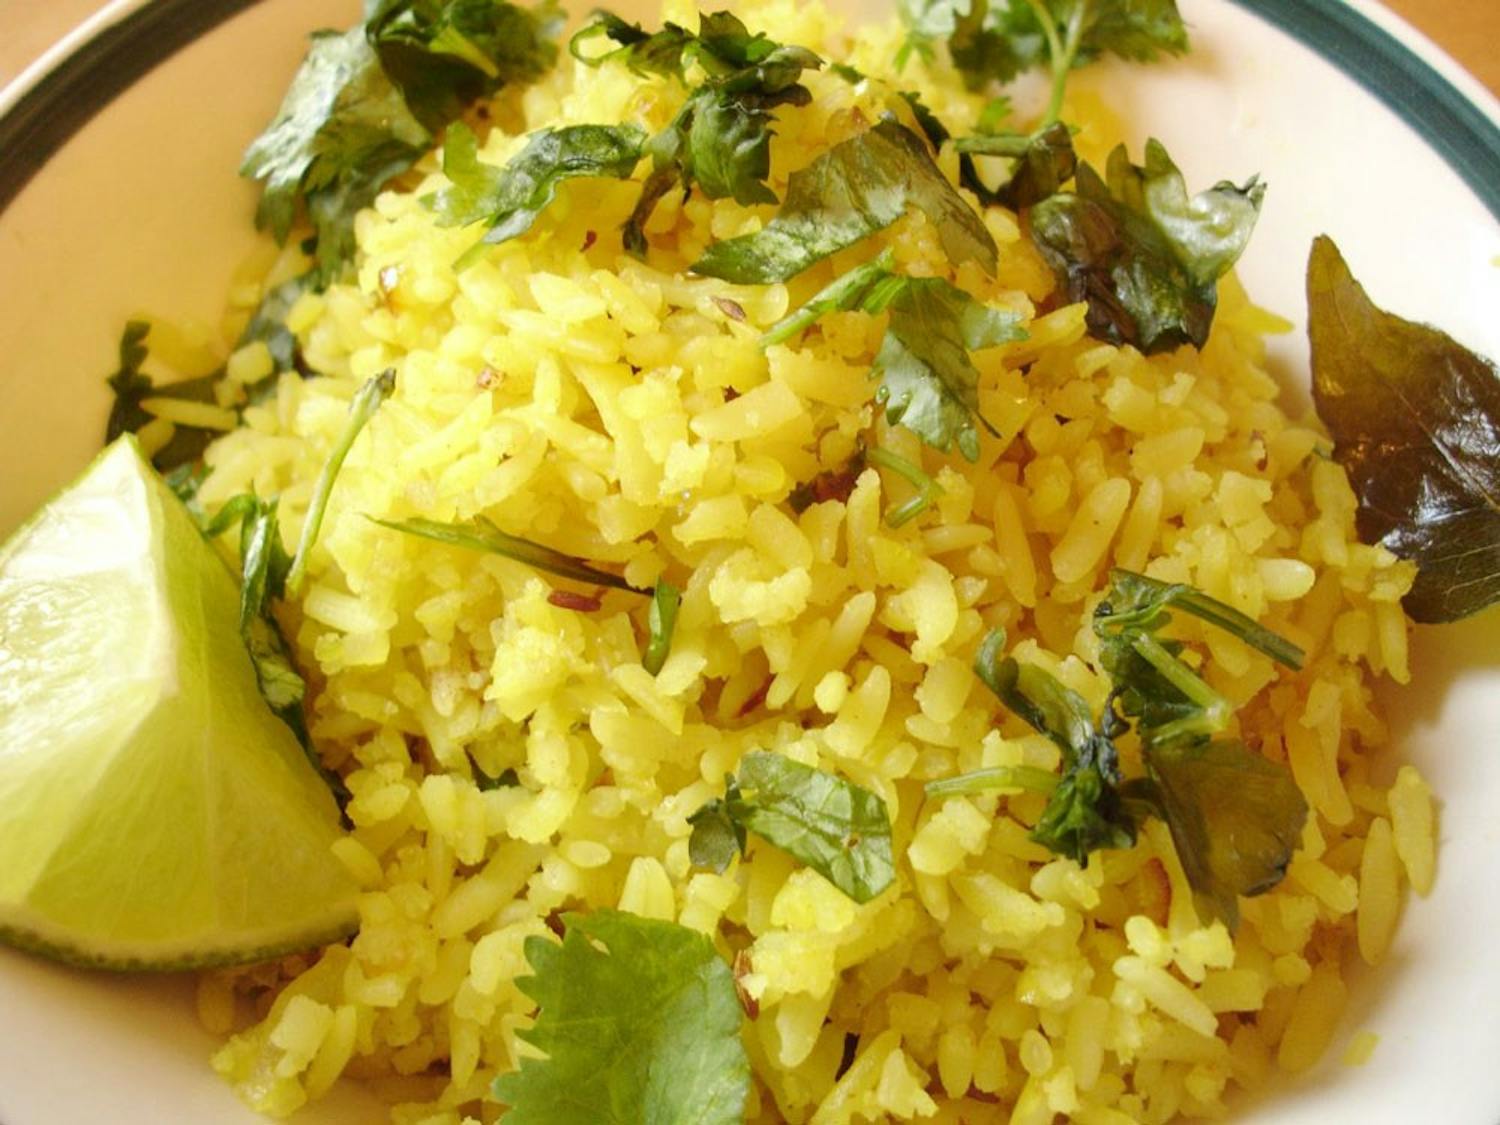 Poha, a traditional breakfast rice dish, is common in Indian households.